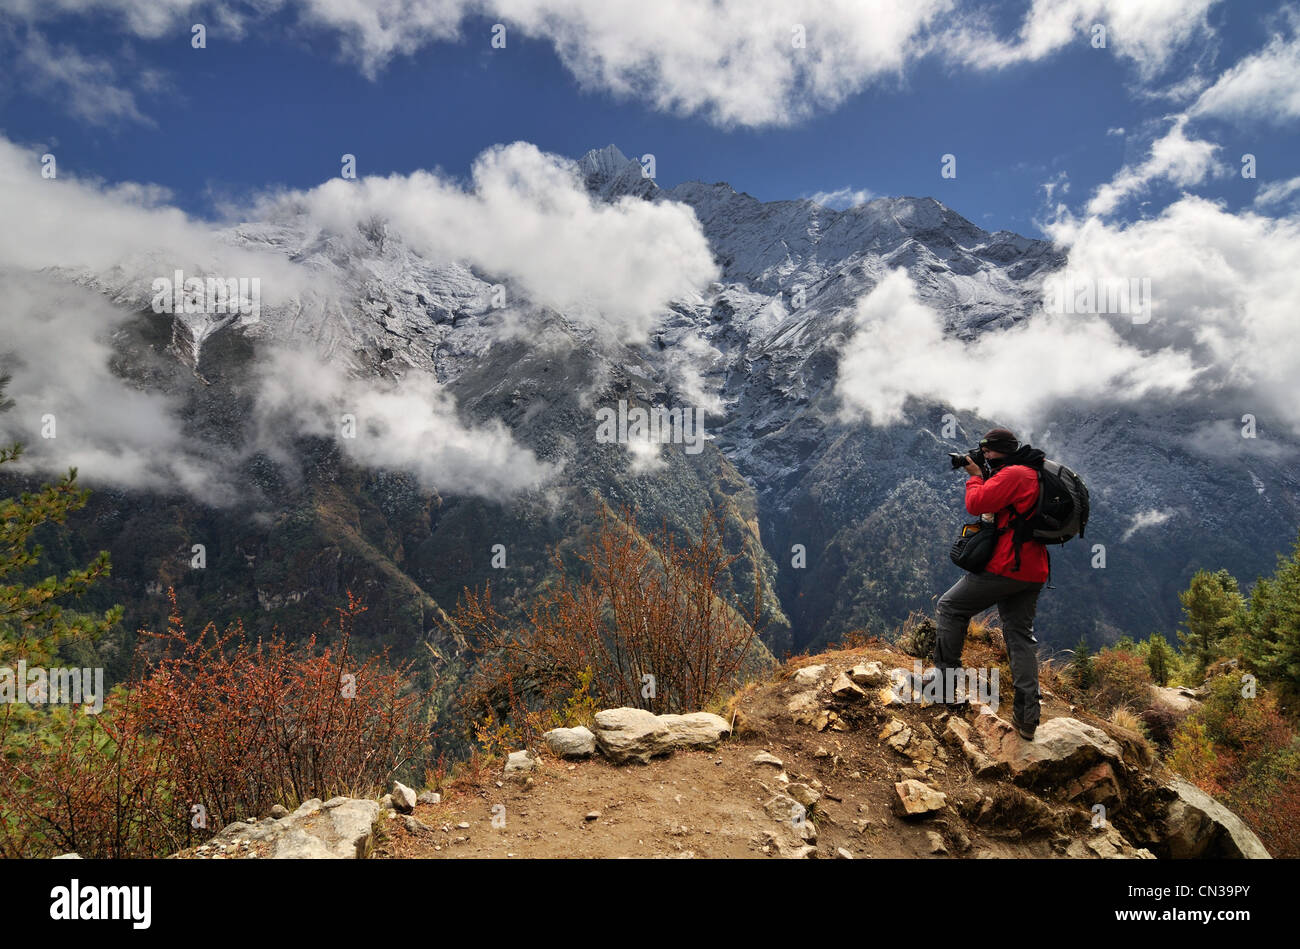 Photographer in the Himalayas on way from Namche Bazaar to Tengboche, Nepal Stock Photo